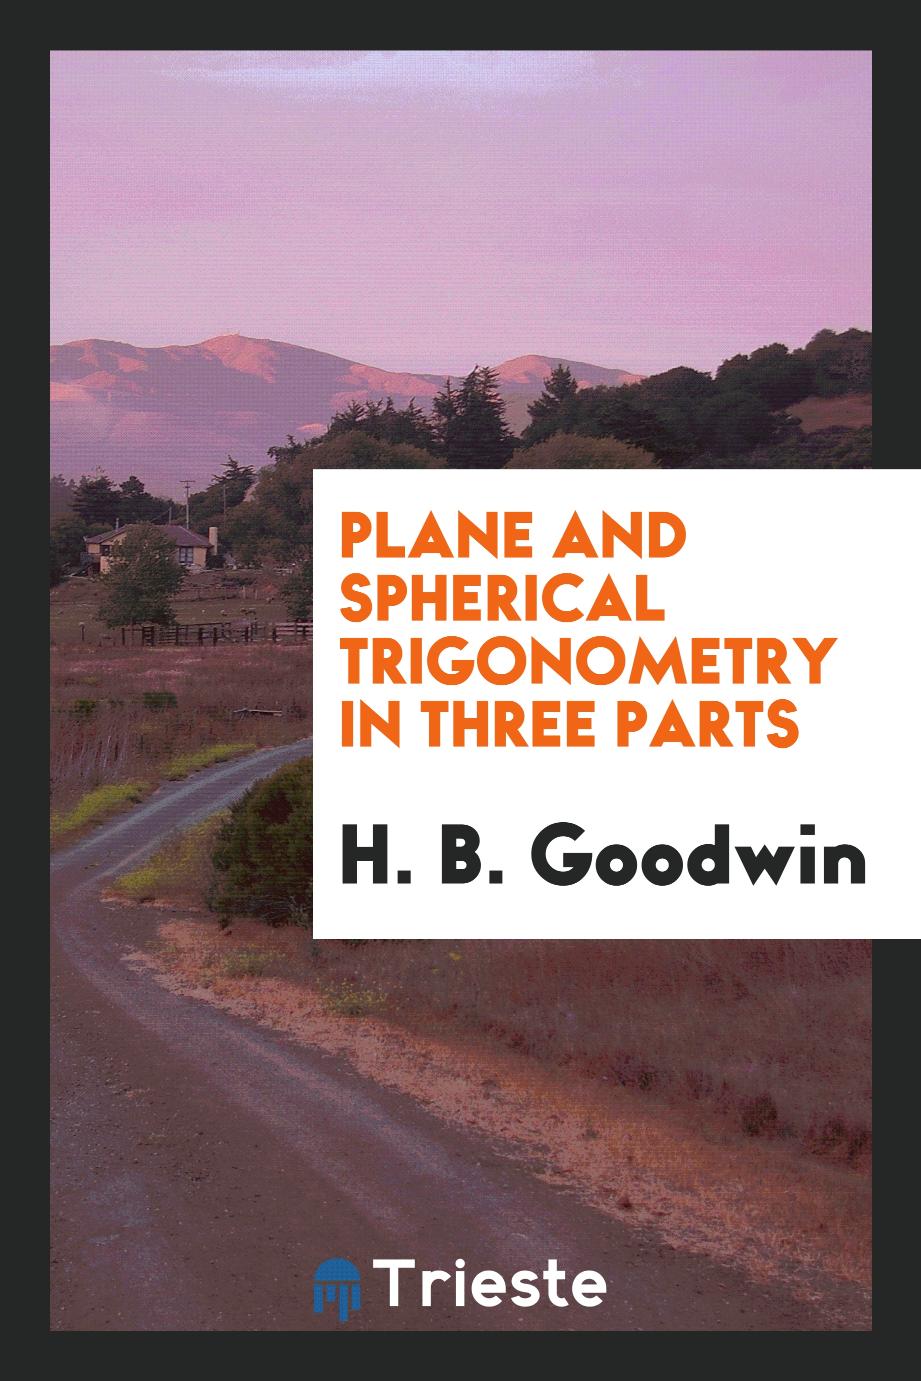 Plane and Spherical Trigonometry in Three Parts